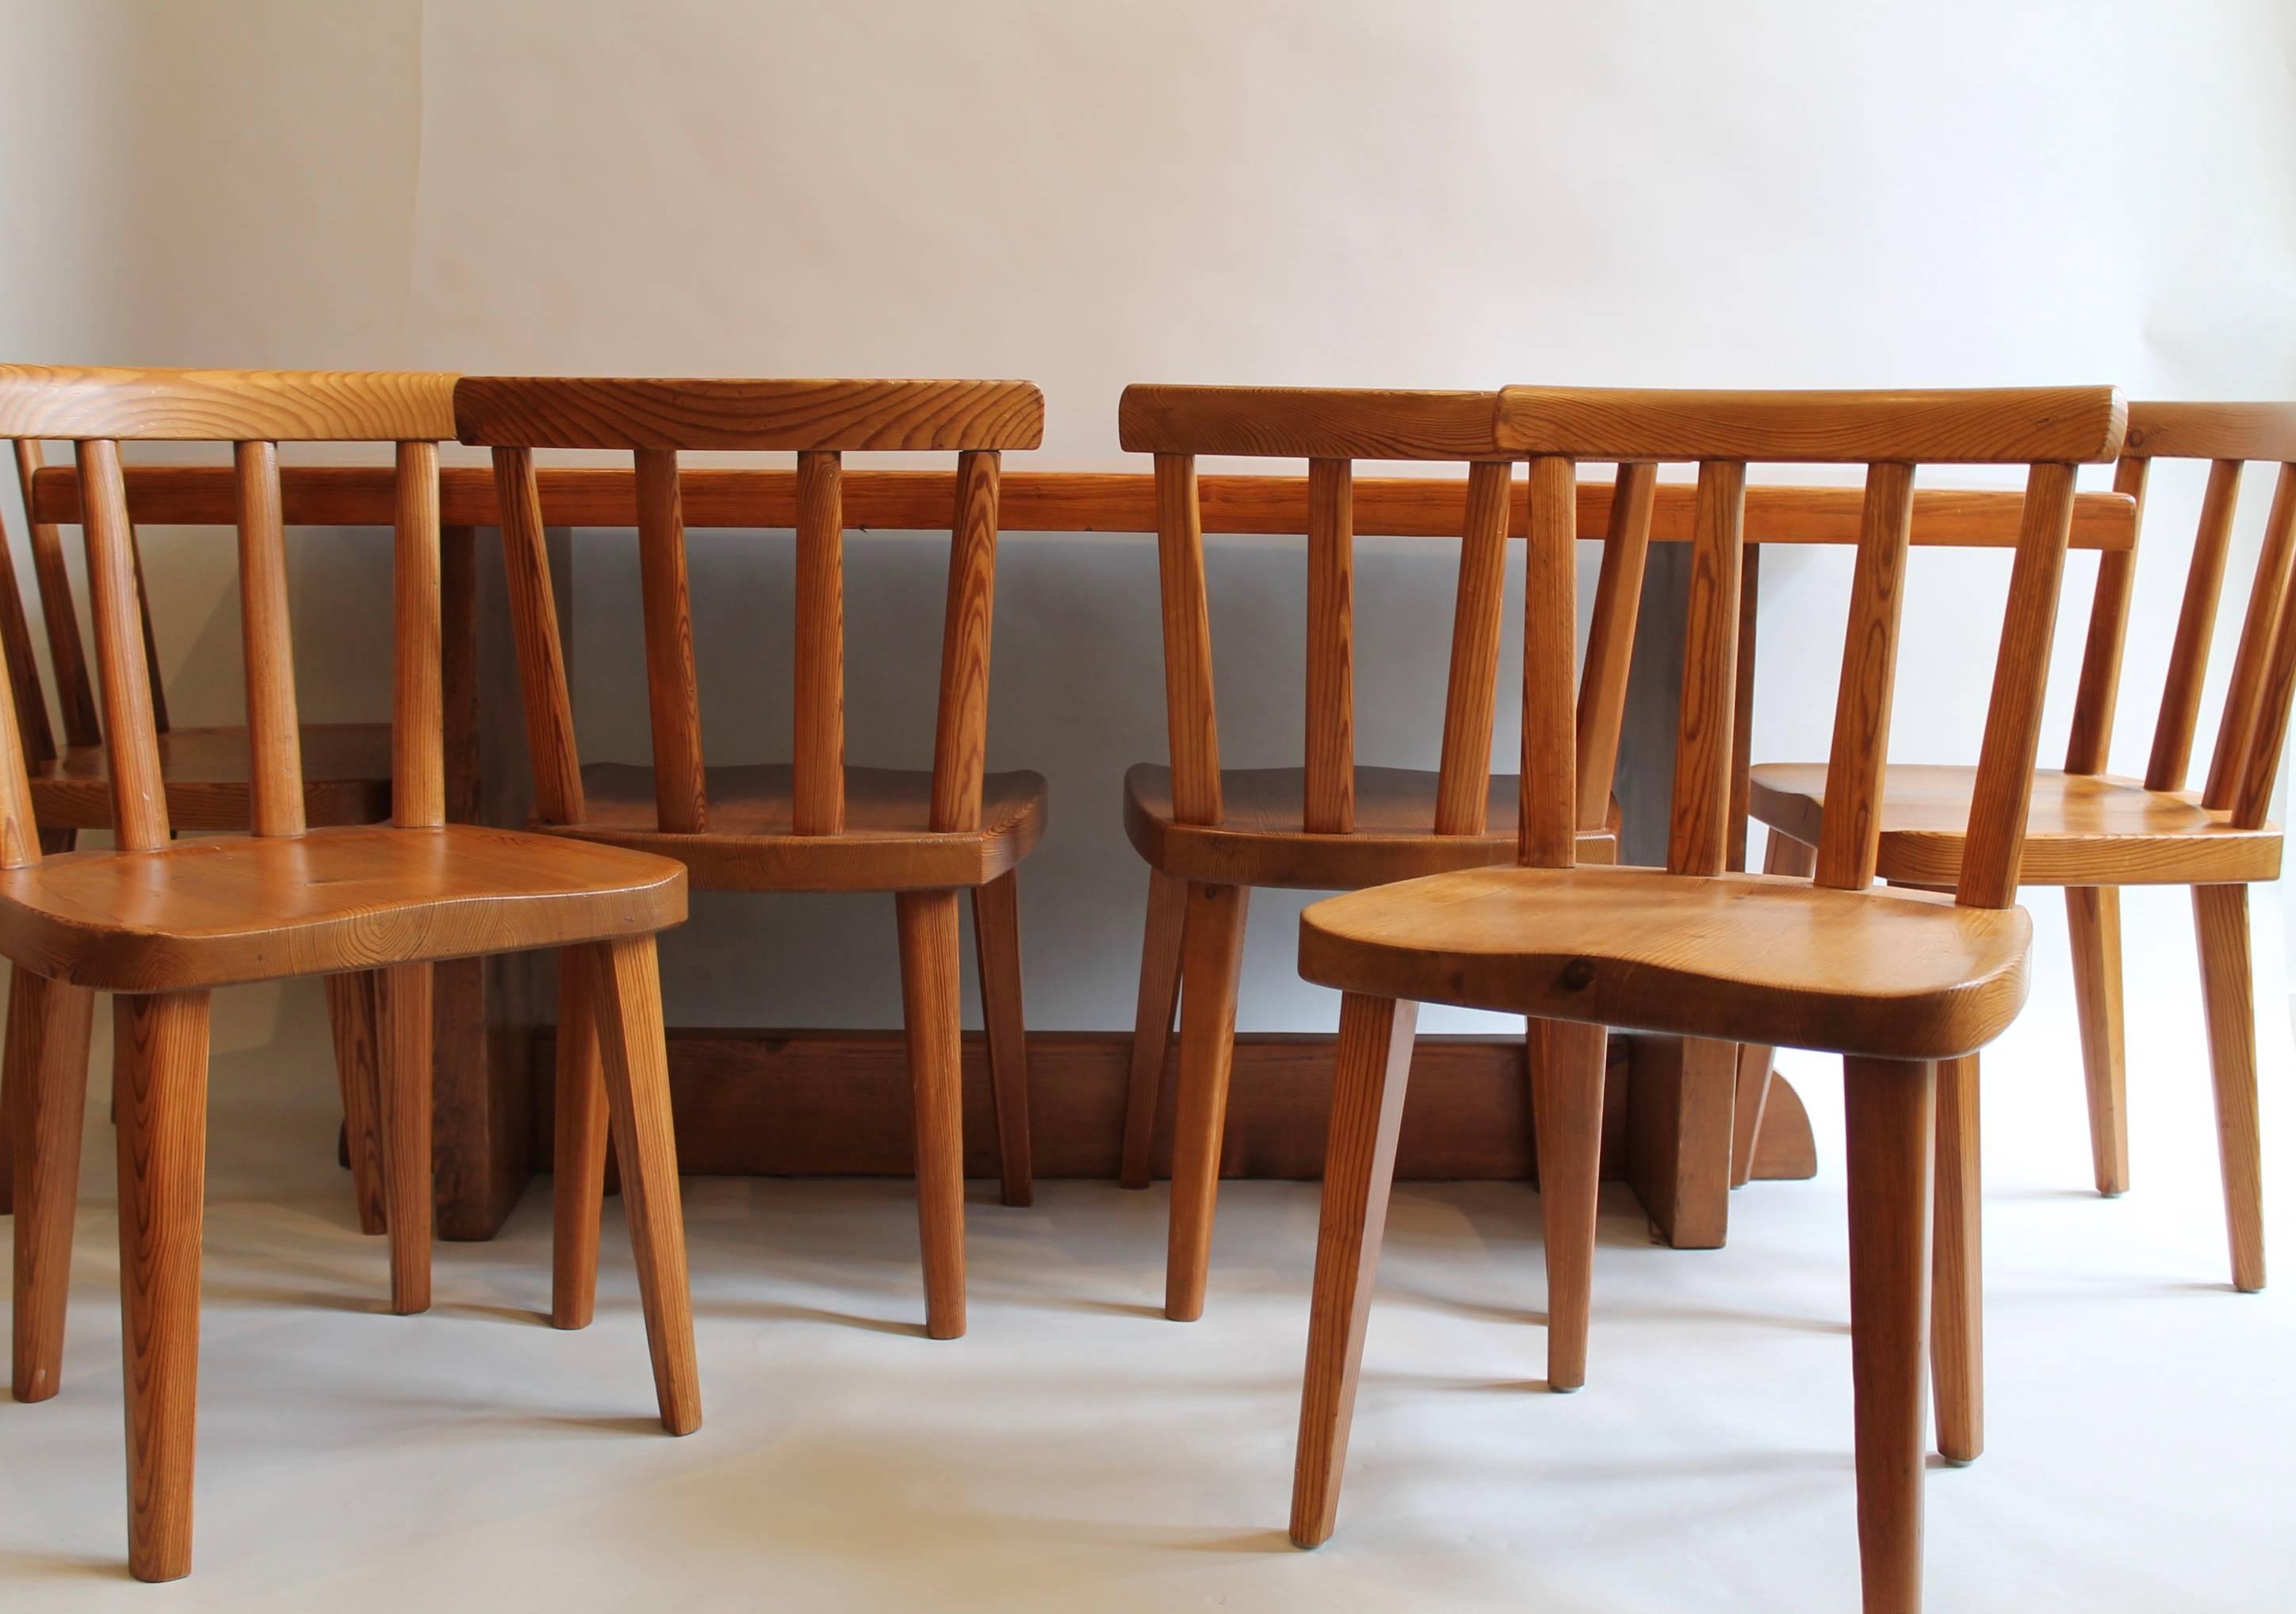 Mid-20th Century Pine Dining Table with Six Matching Chairs by Axel Einar Hjorth